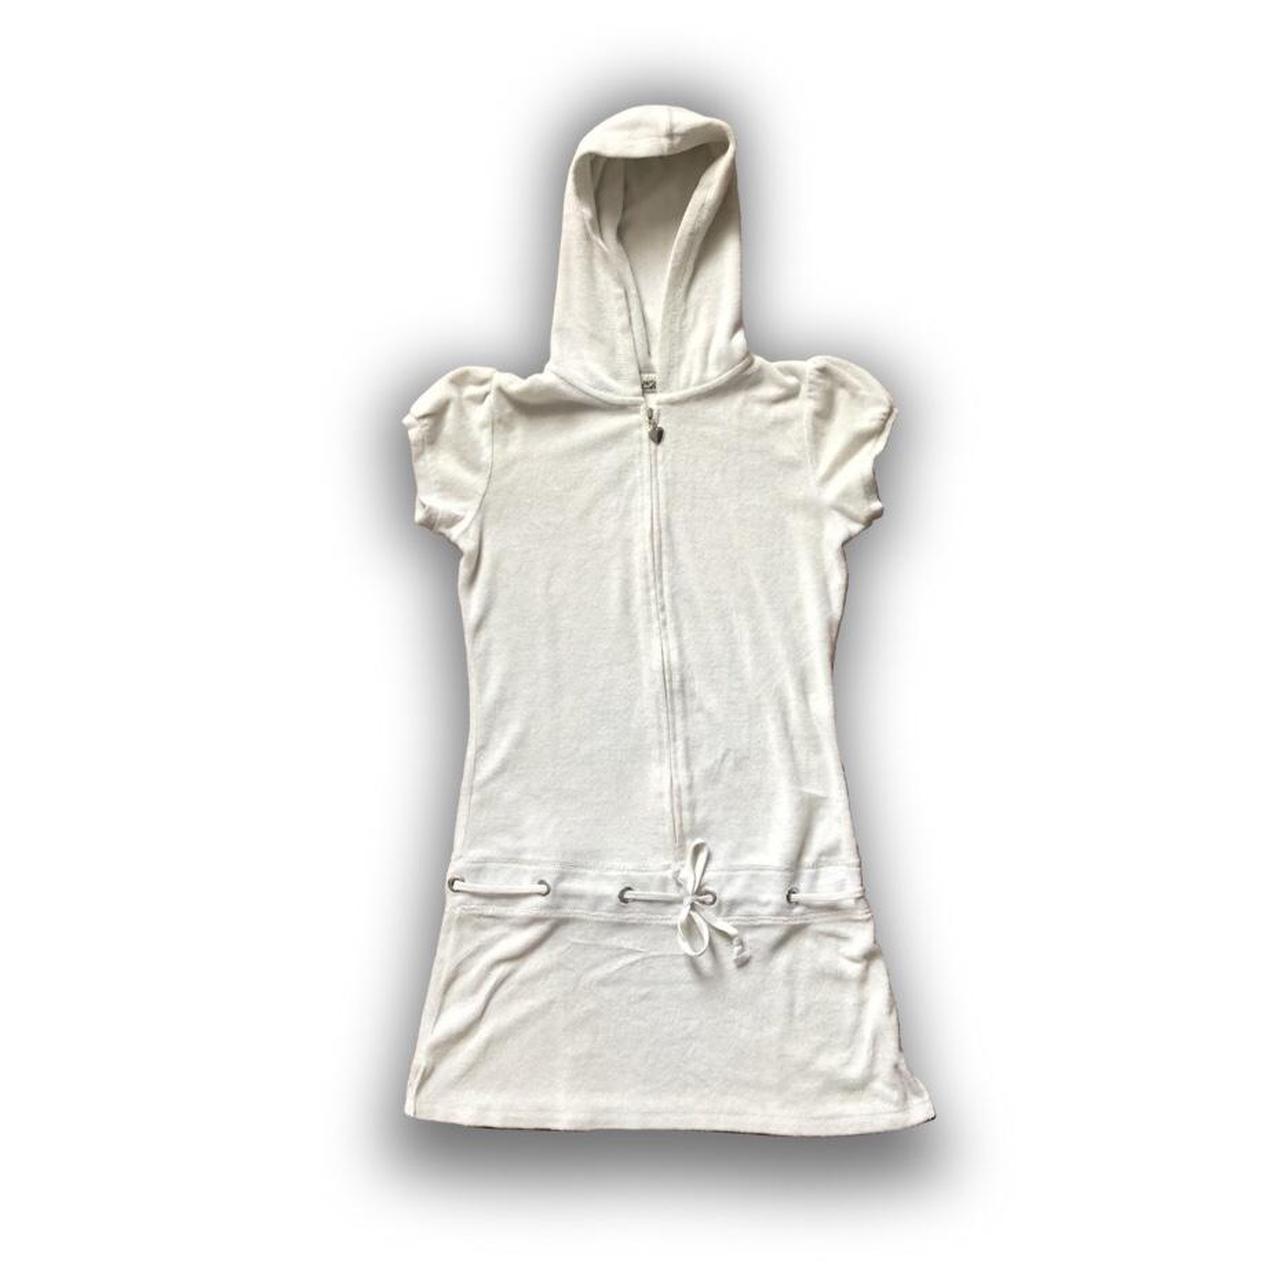 Product Image 1 - THE HILTON TERRY CLOTH DRESS
white